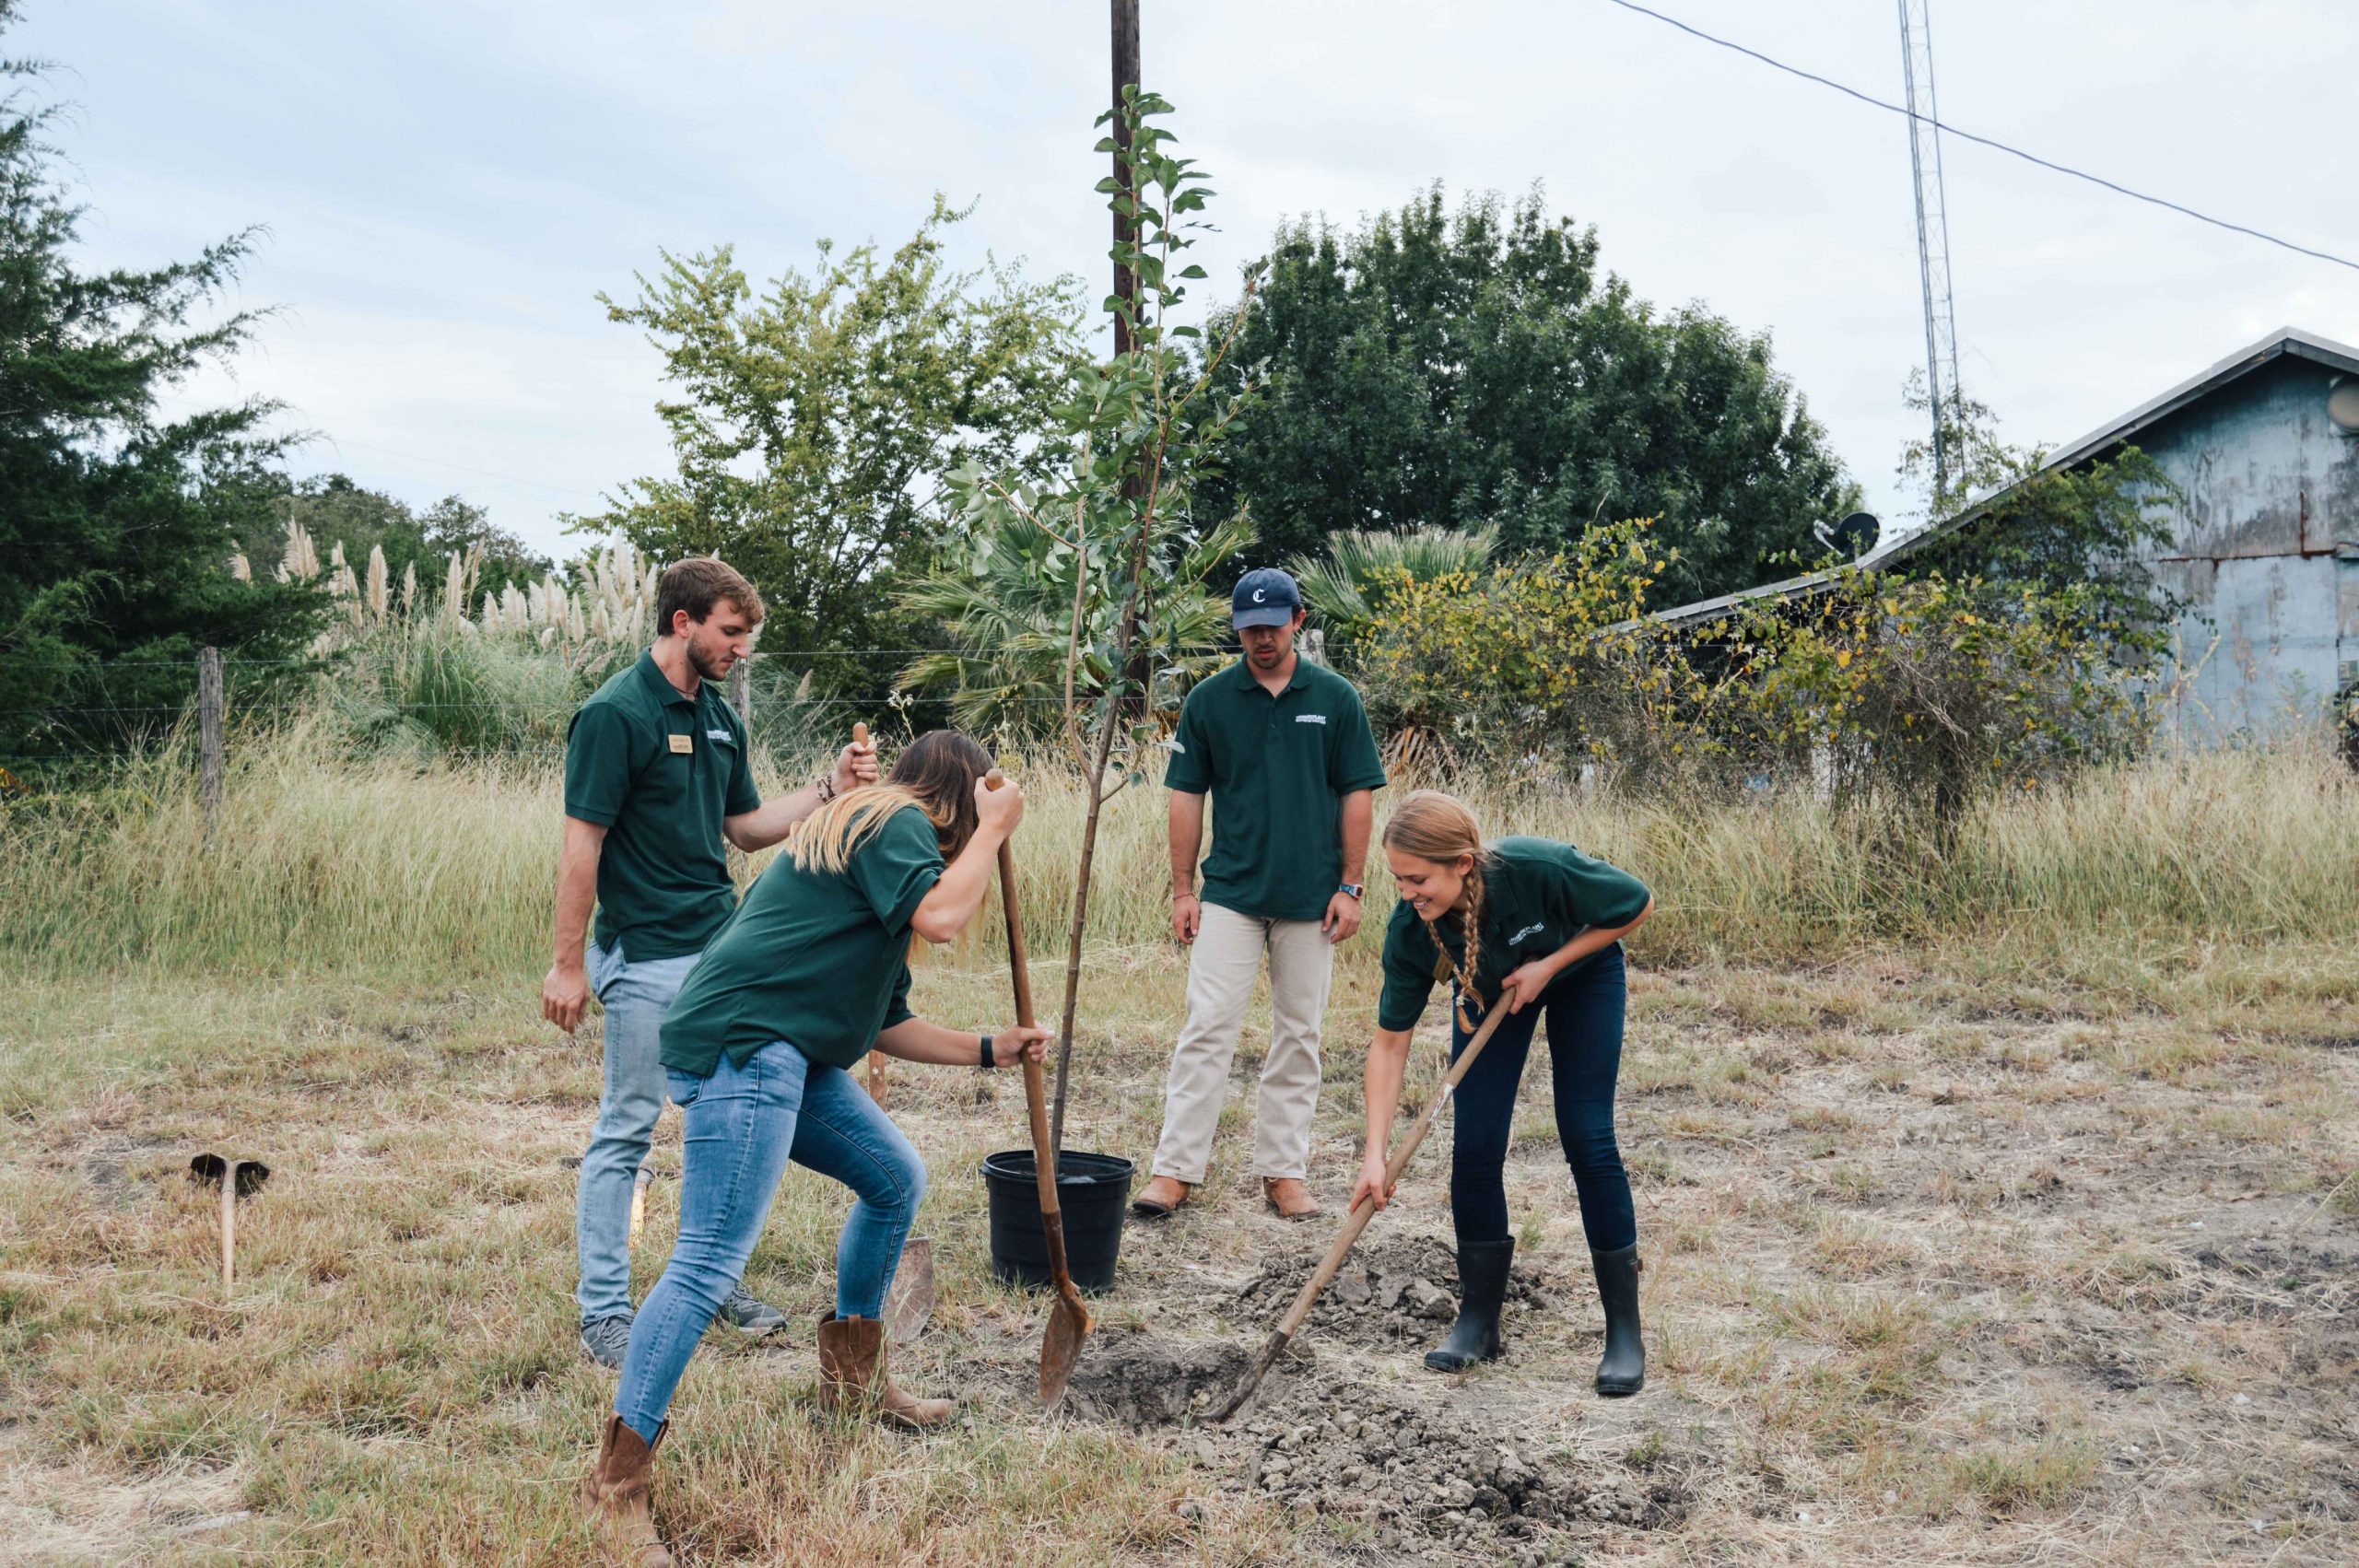 Students+to+plant+over+700+trees+across+Bryan-College+Station+area